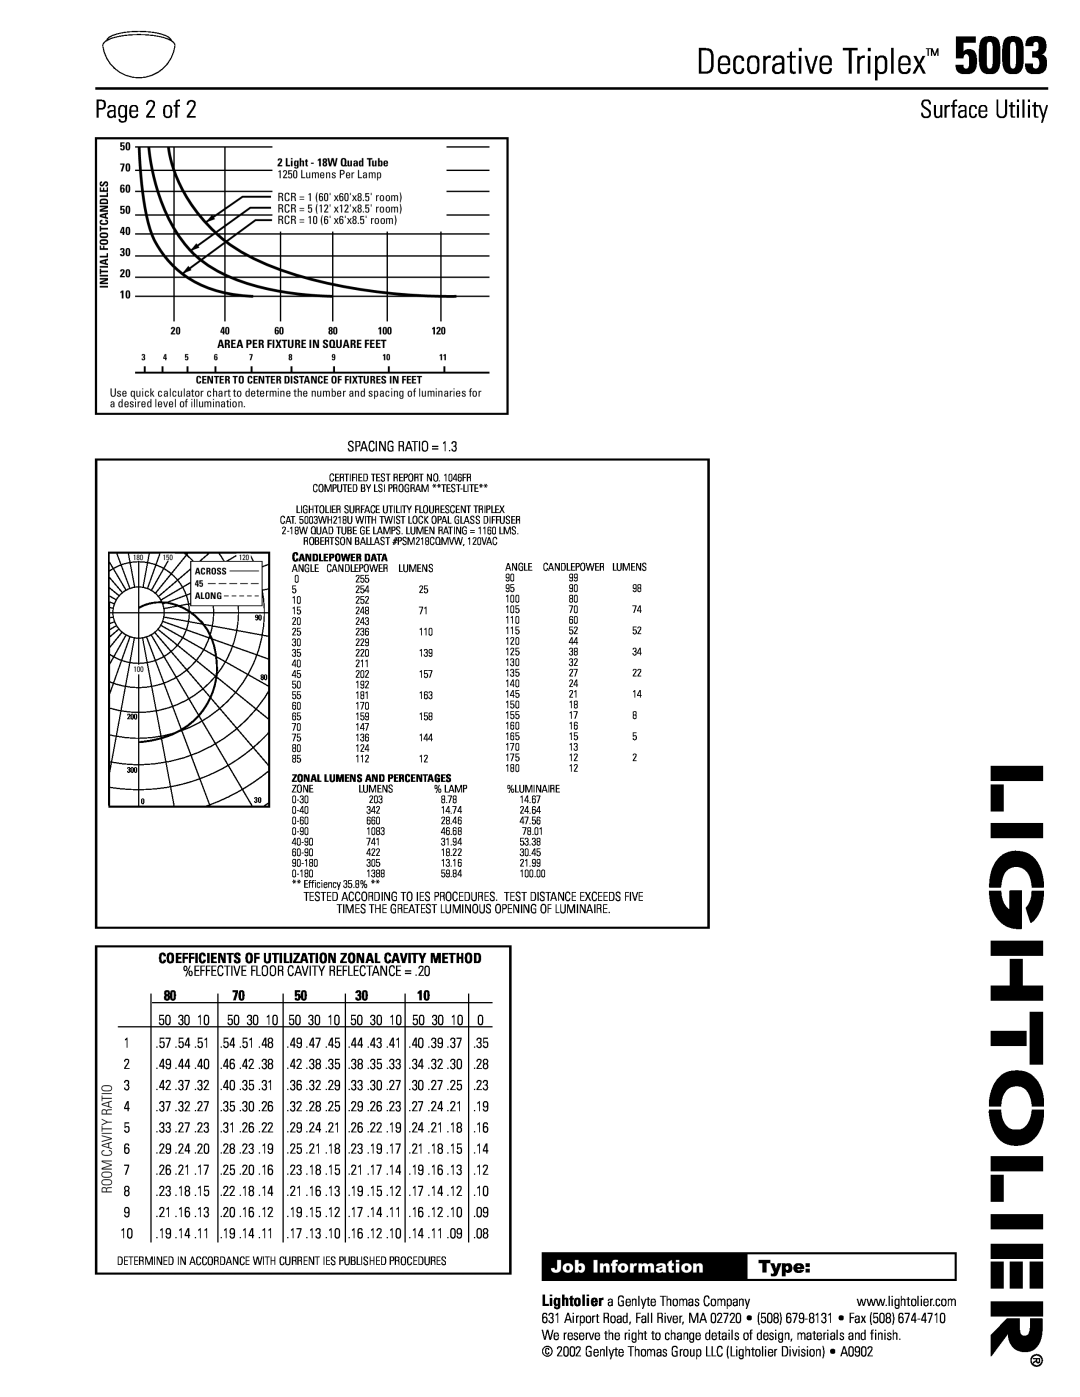 Lightolier 5003 manual Page 2 of, Decorative Triplex, Surface Utility, Job Information, Type 